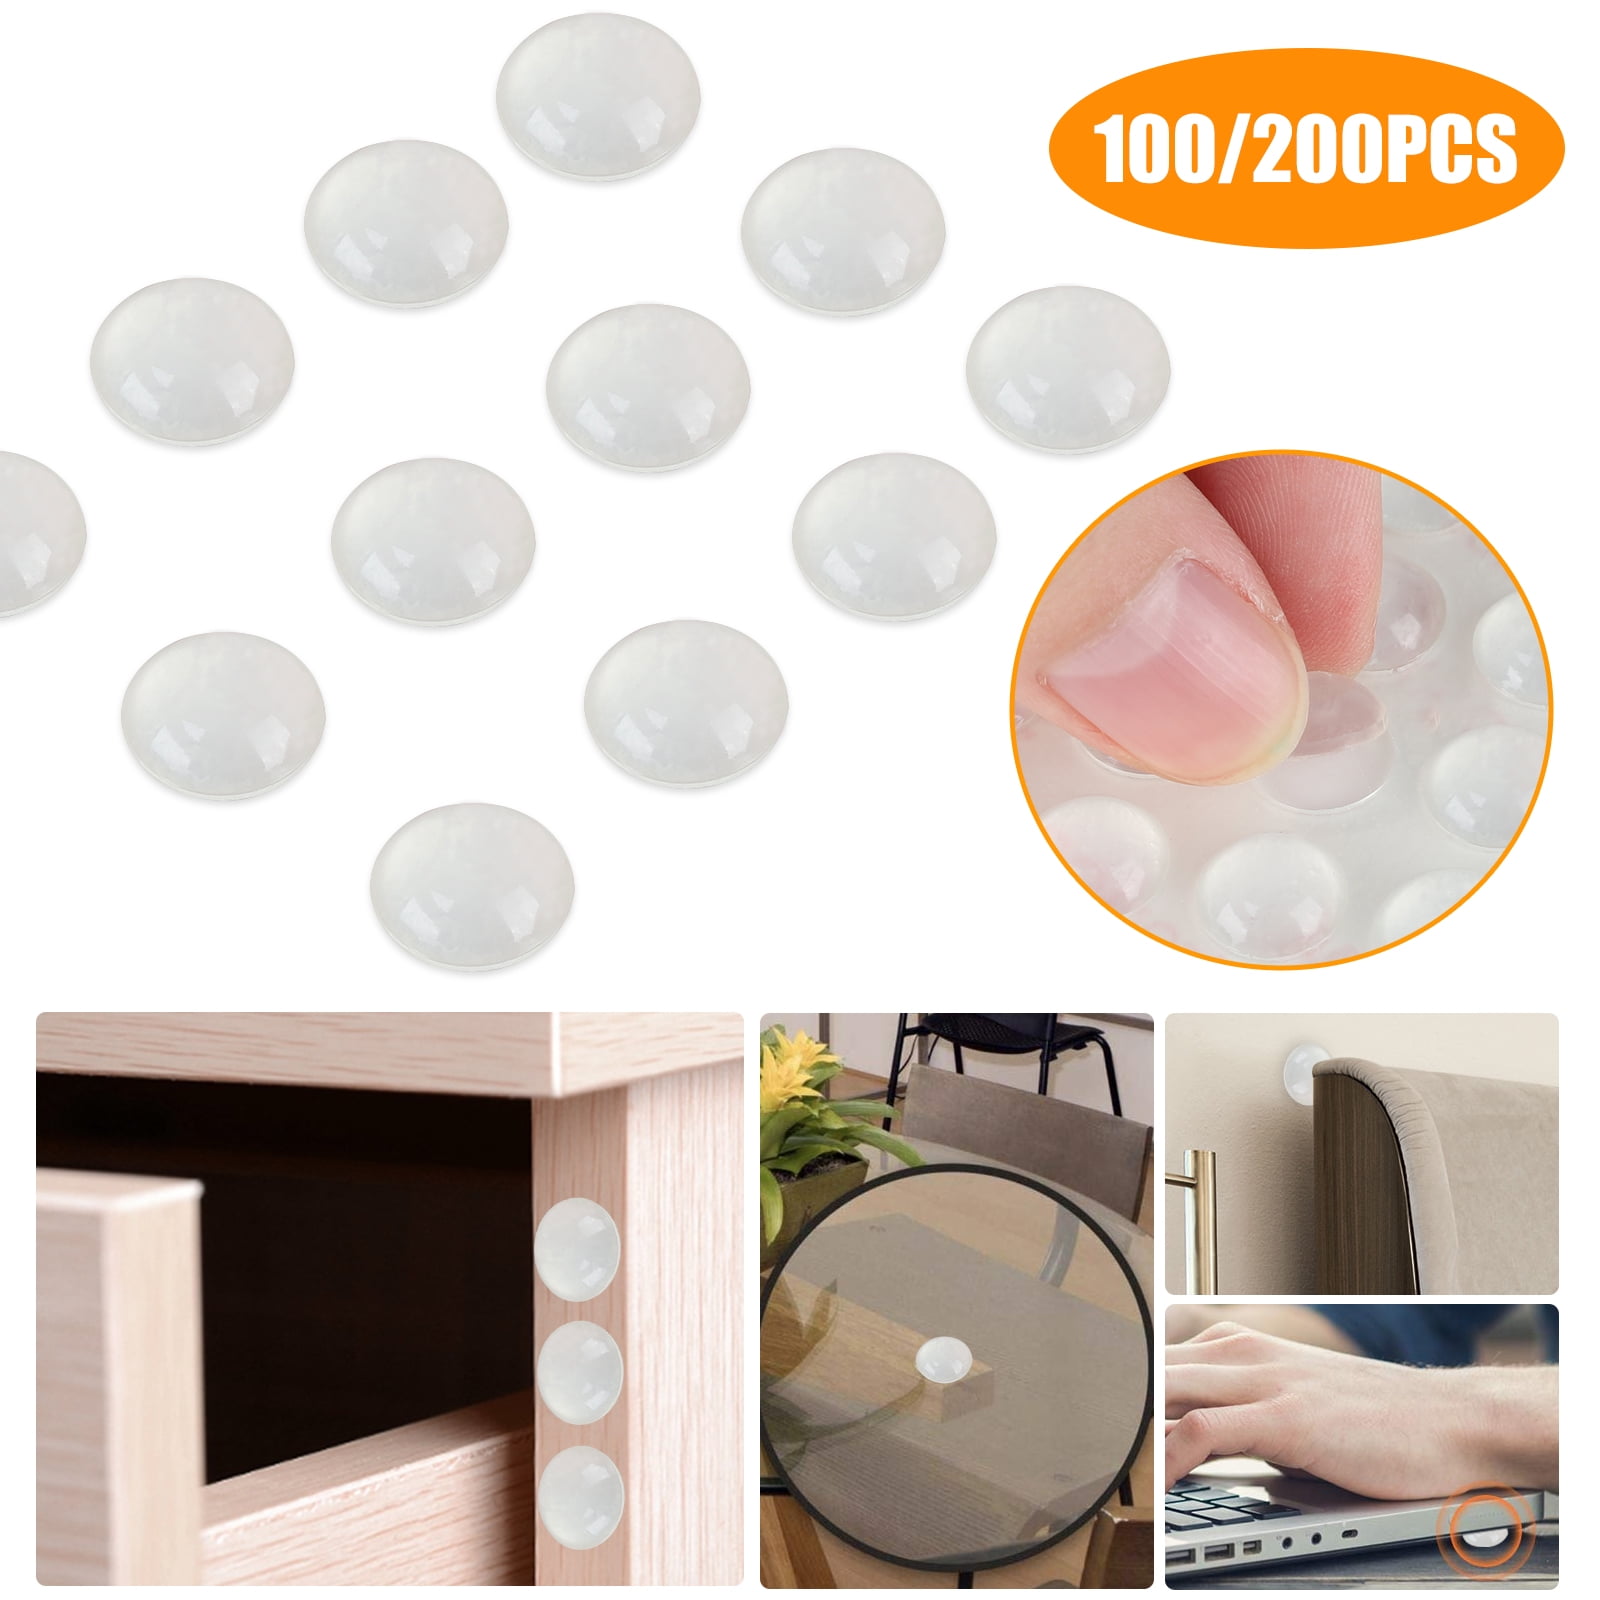 Hemispherical Small SELF ADHESIVE Stoppers Silicone BUMPONS CLEAR RUBBER FEET 